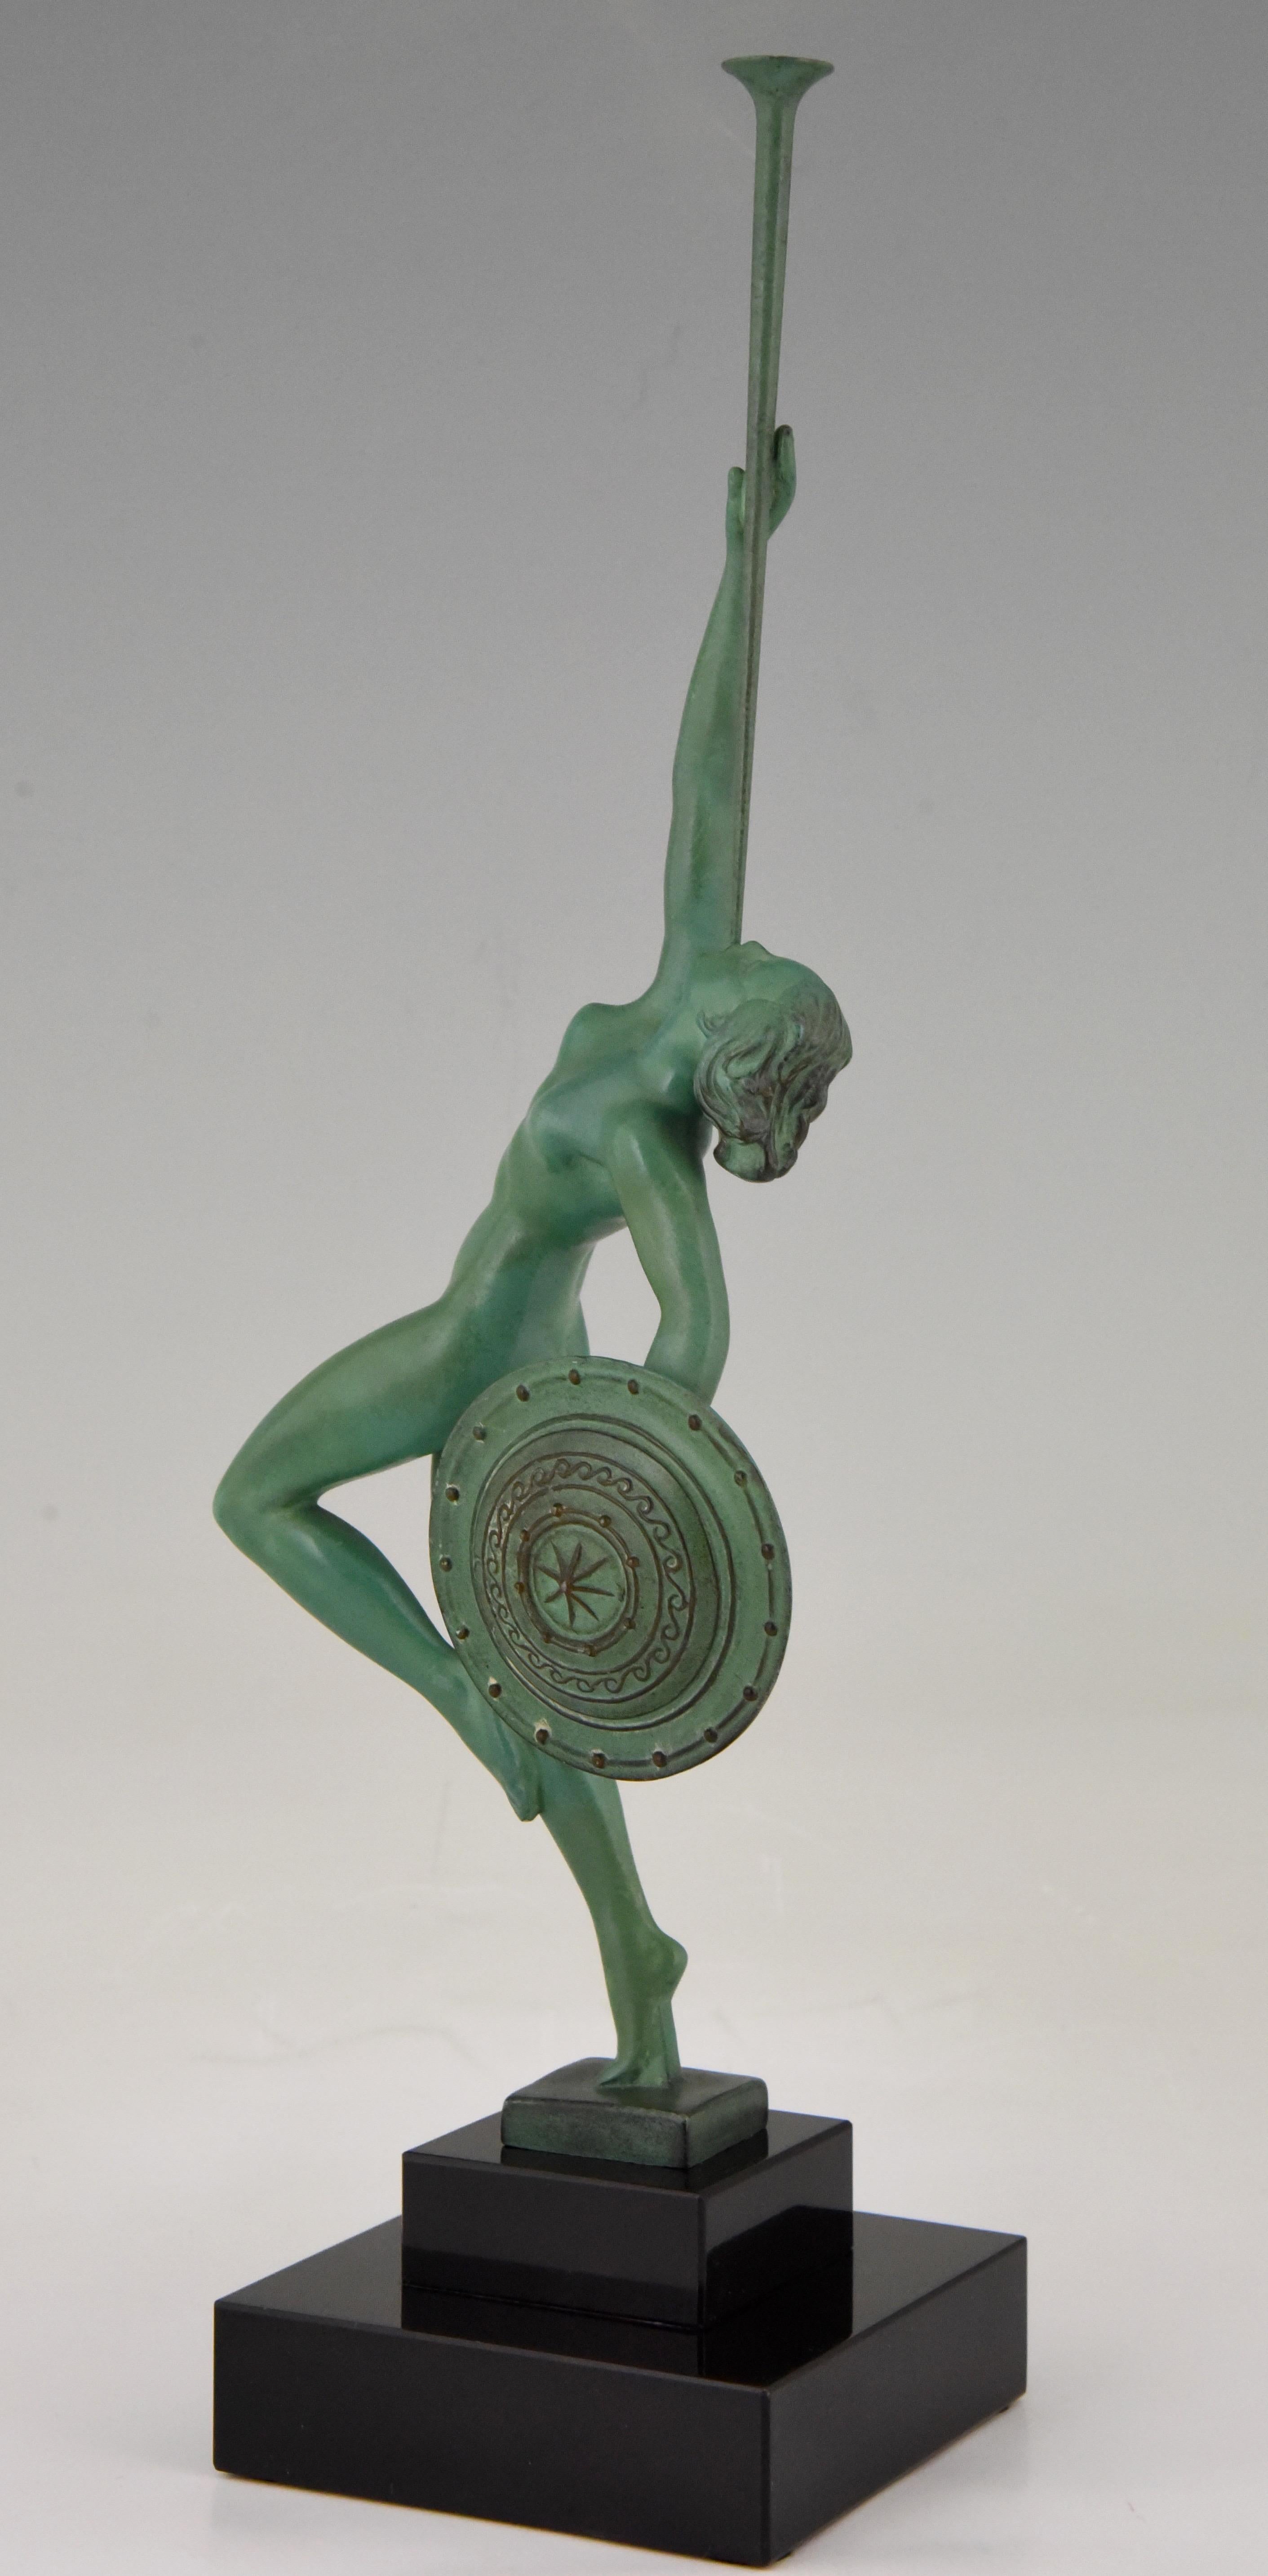 Jericho, Art Deco sculpture of a nude with shield and trumpet by Raymonde Guerbe, the wife of the French sculptor Pierre Le Faguays. Cast by the Max Le Verrier foundry circa 1930.
Literature:
“Bronzes, sculptors and founders” by H. Berman,